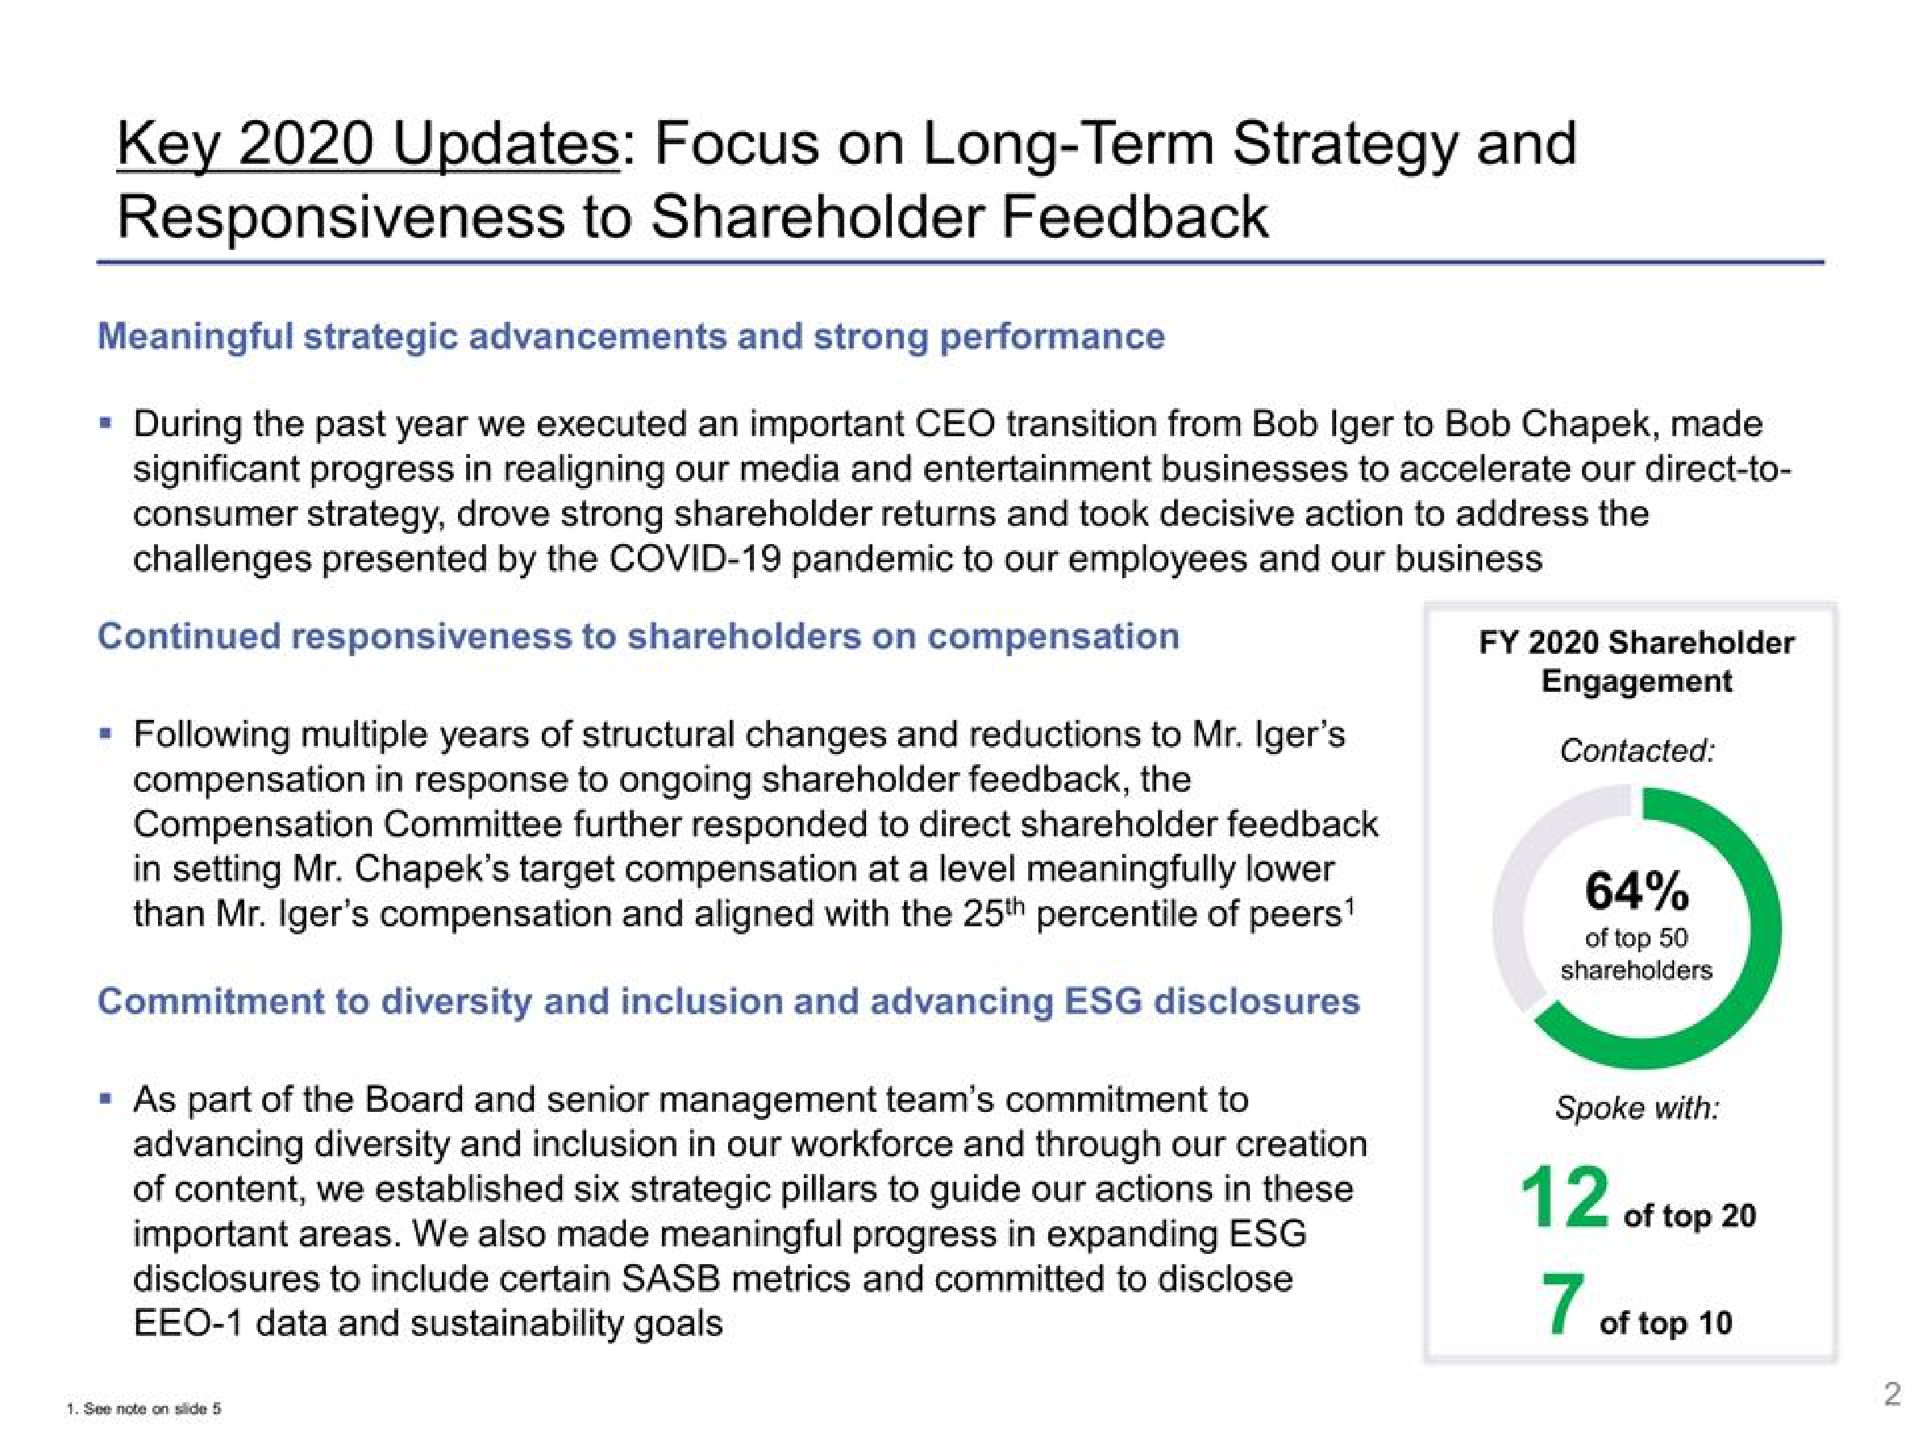 key updates focus on long term strategy and responsiveness to shareholder feedback | Disney